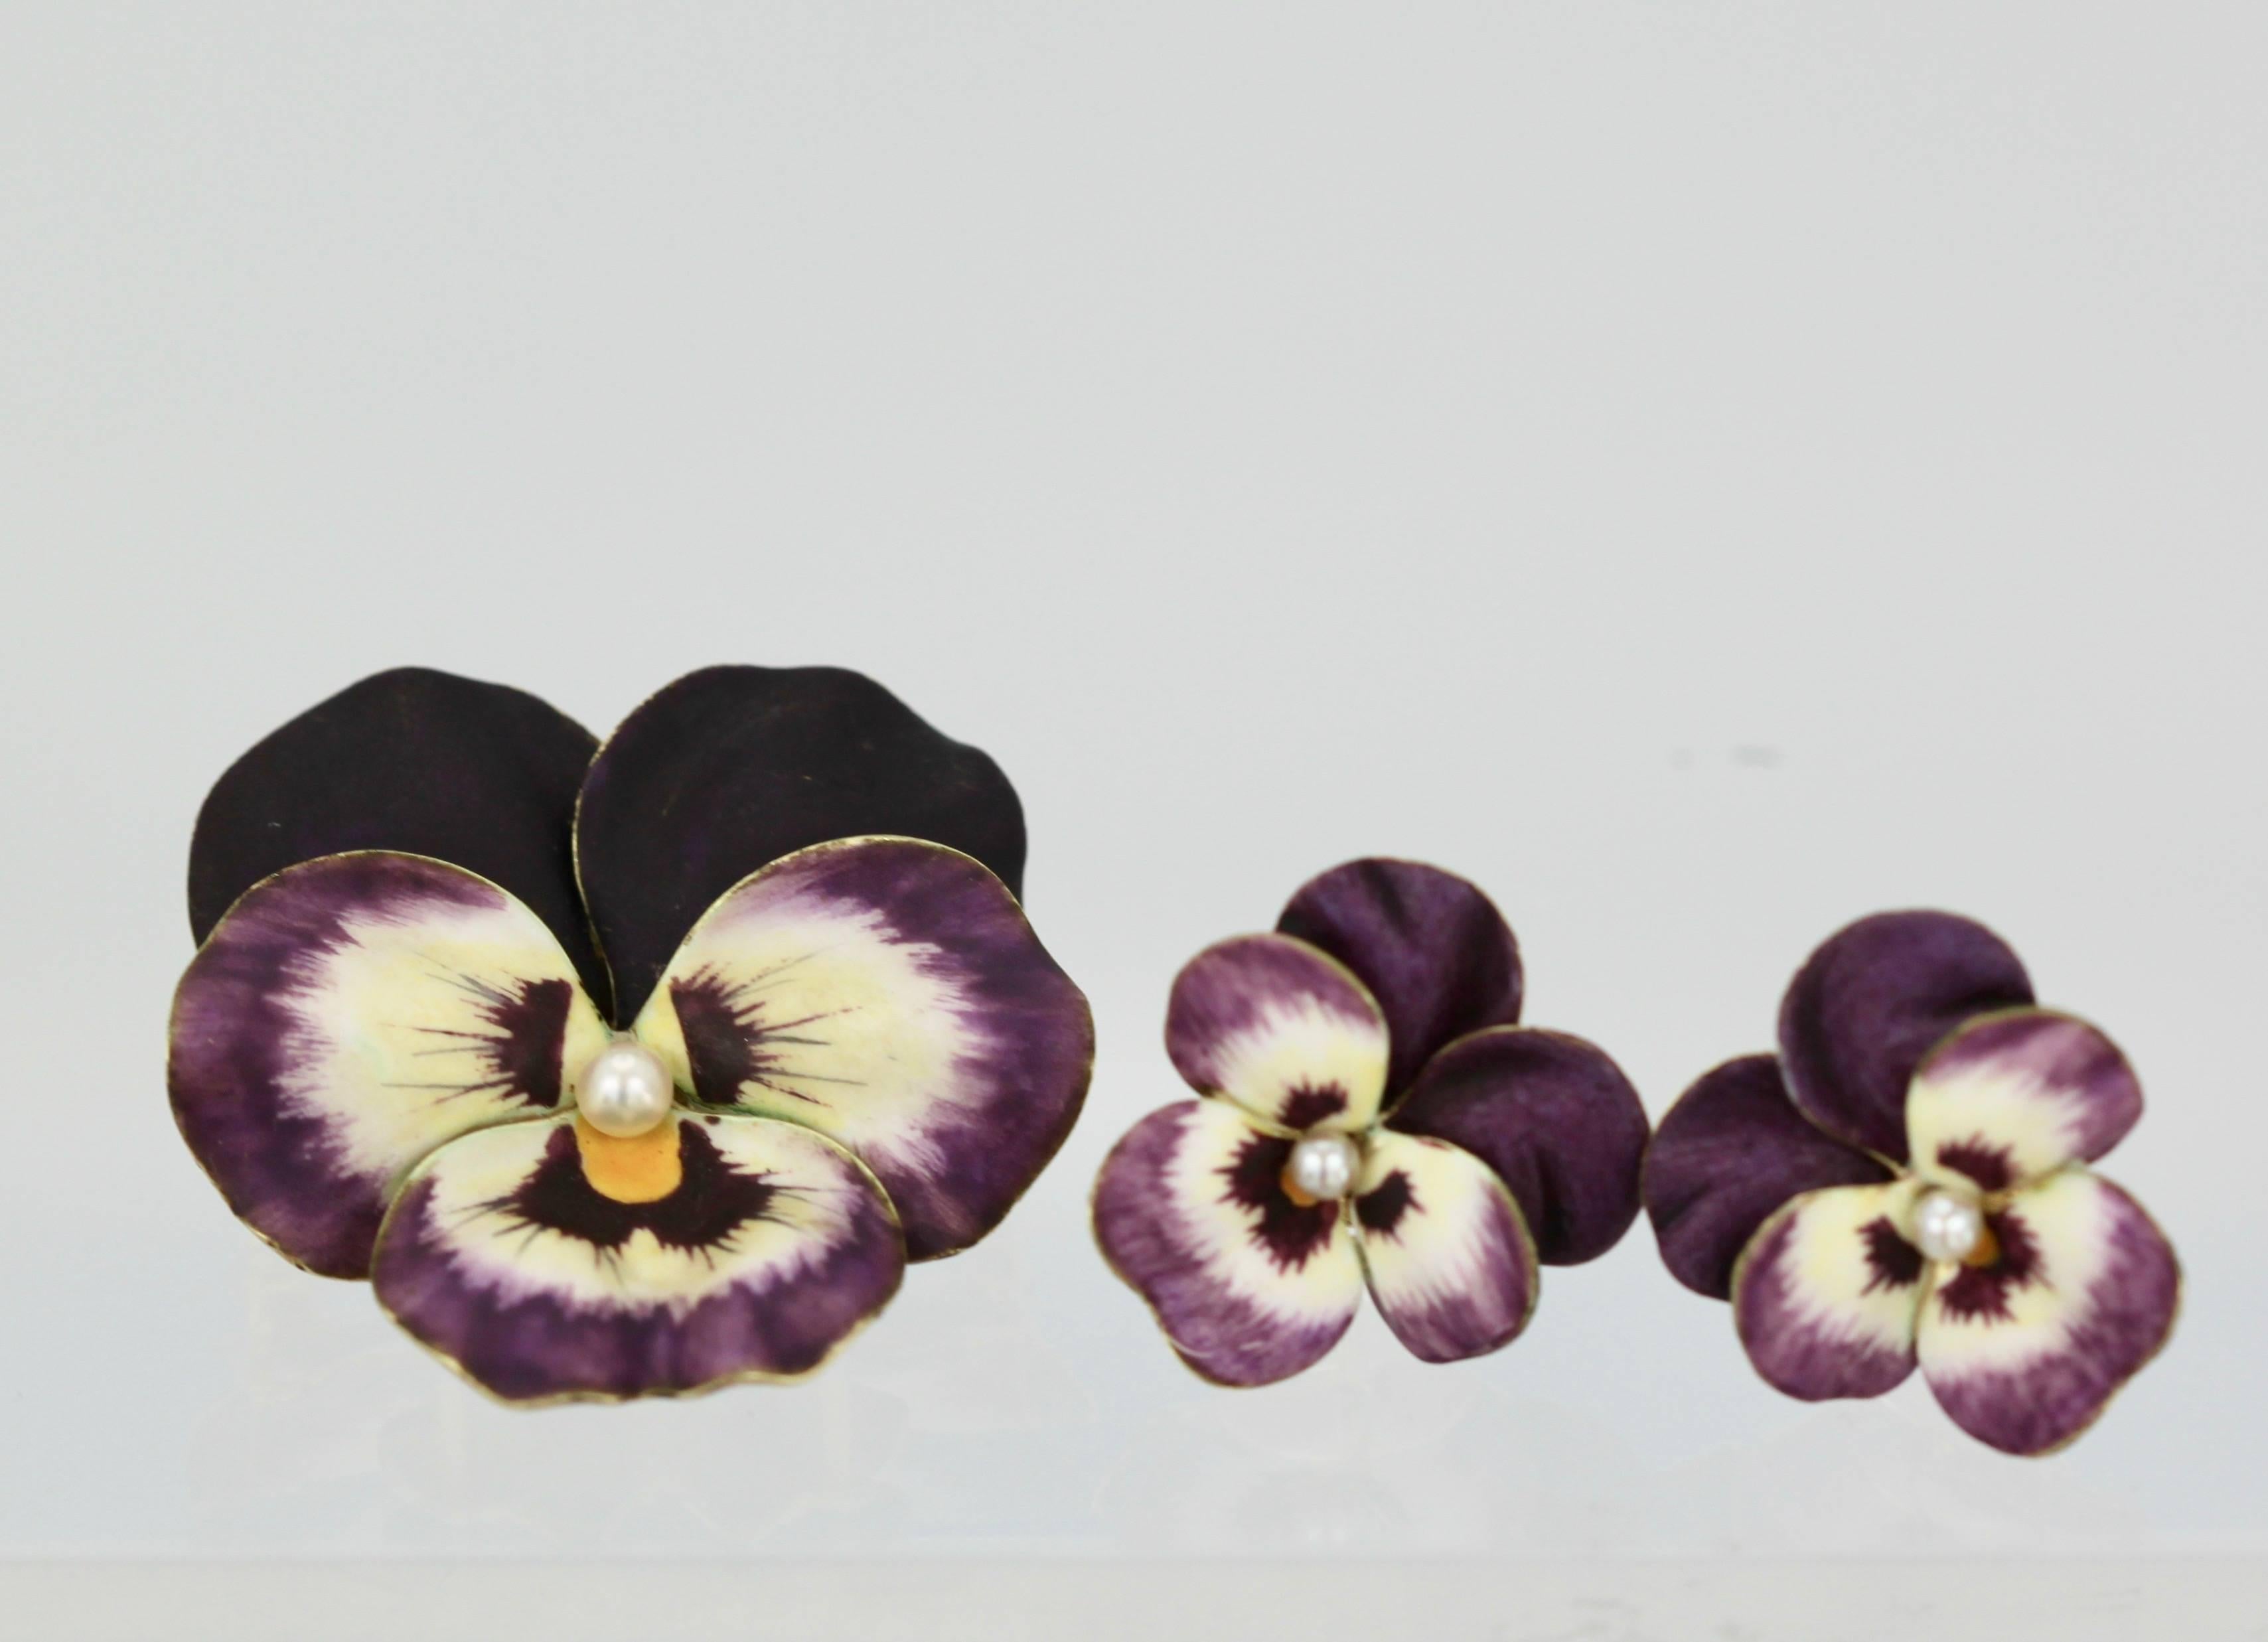 This vintage pansy set is in fantastic condition.  The earrings were a non pierced screw back style which was common in the day.  I had these changed to posts for pierced ears.  The Brooch has a place clip for hanging on a chain if you wish. The